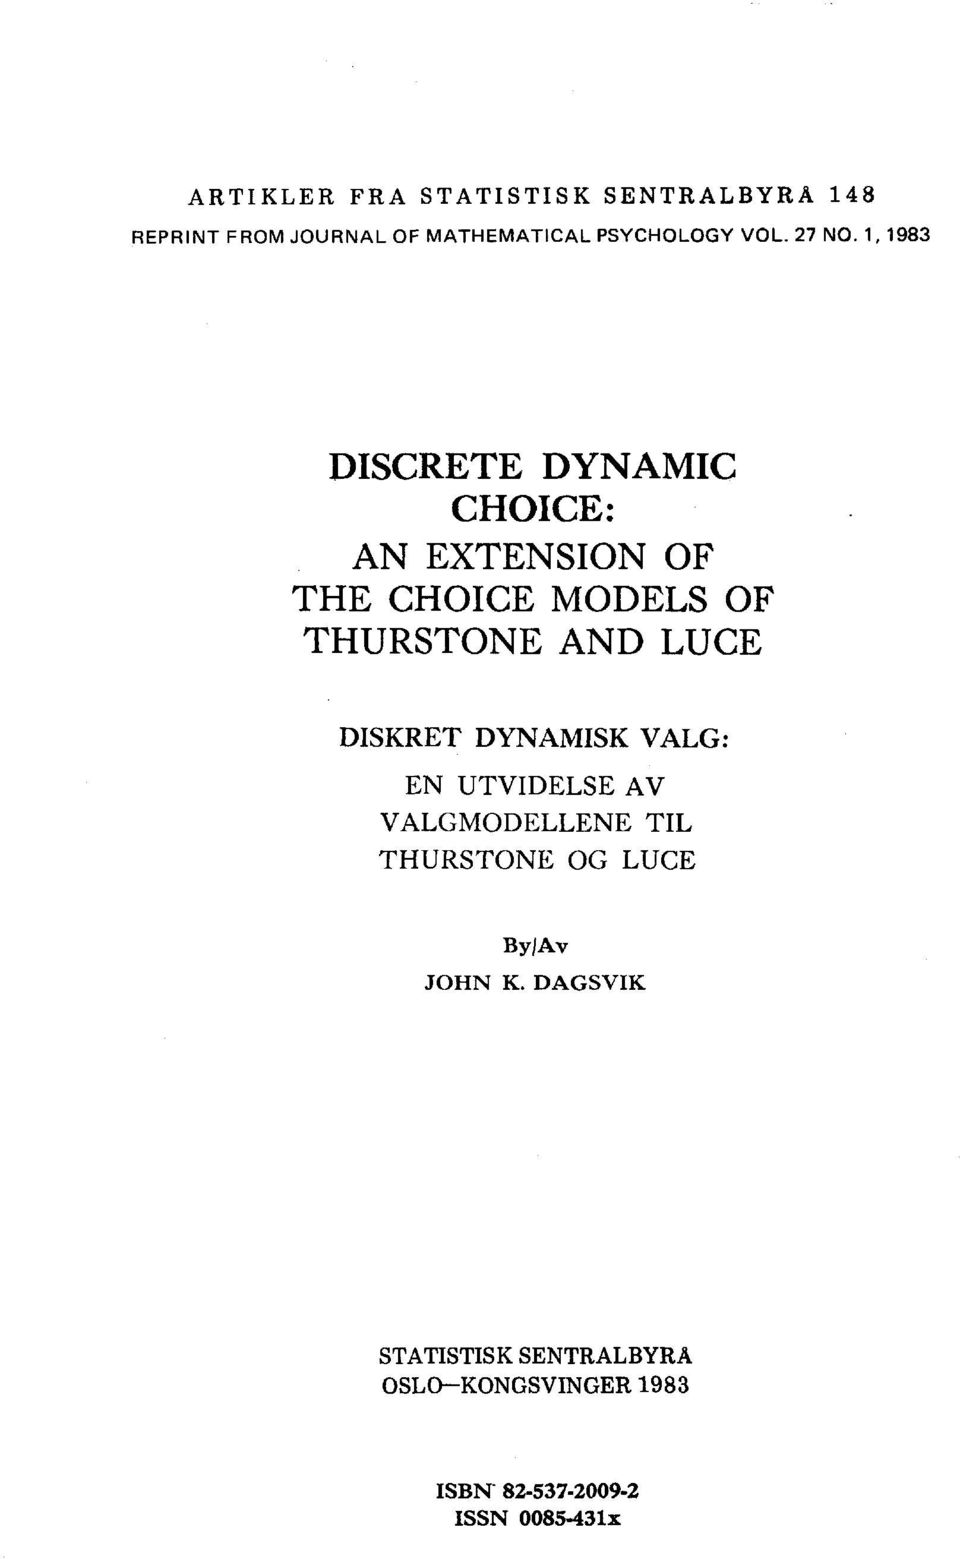 1, 1983 DISCRETE DYNAMIC CHOICE: AN EXTENSION OF THE CHOICE MODELS OF THURSTONE AND LUCE